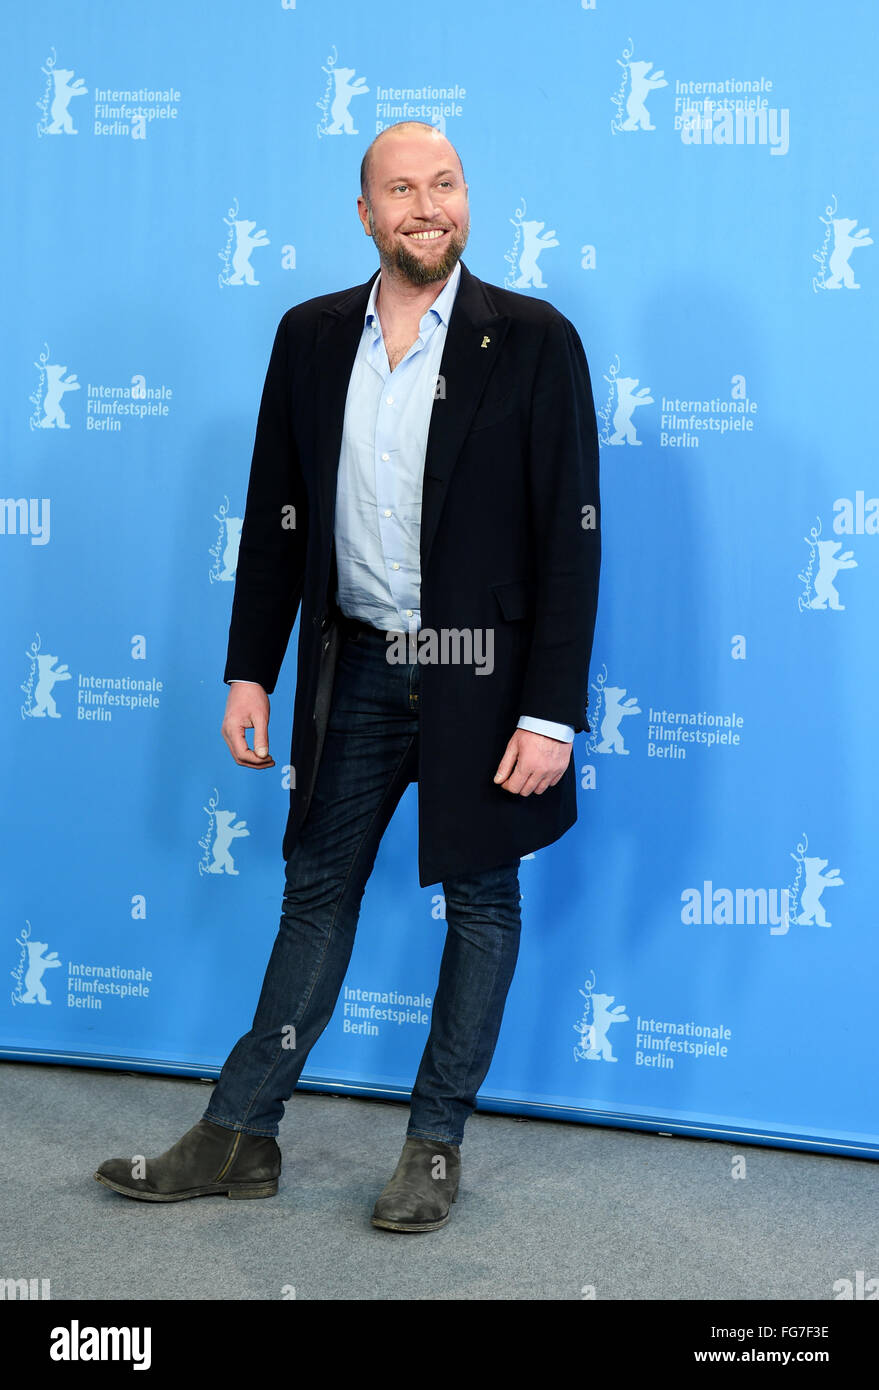 Berlin, Germany. 11th Feb, 2016. 66th International Film Festival in Berlin, Germany, 11 February 2016. Photo call 'Des nouvelles de la planete Mars' ('News from planet Mars'): Actor Francois Damiens. The film runs in Berlinale section Competition (not in competition). The Berlinale runs from 11 February to 21 February 2016. Photo: Jens Kalaene/dpa/Alamy Live News Stock Photo